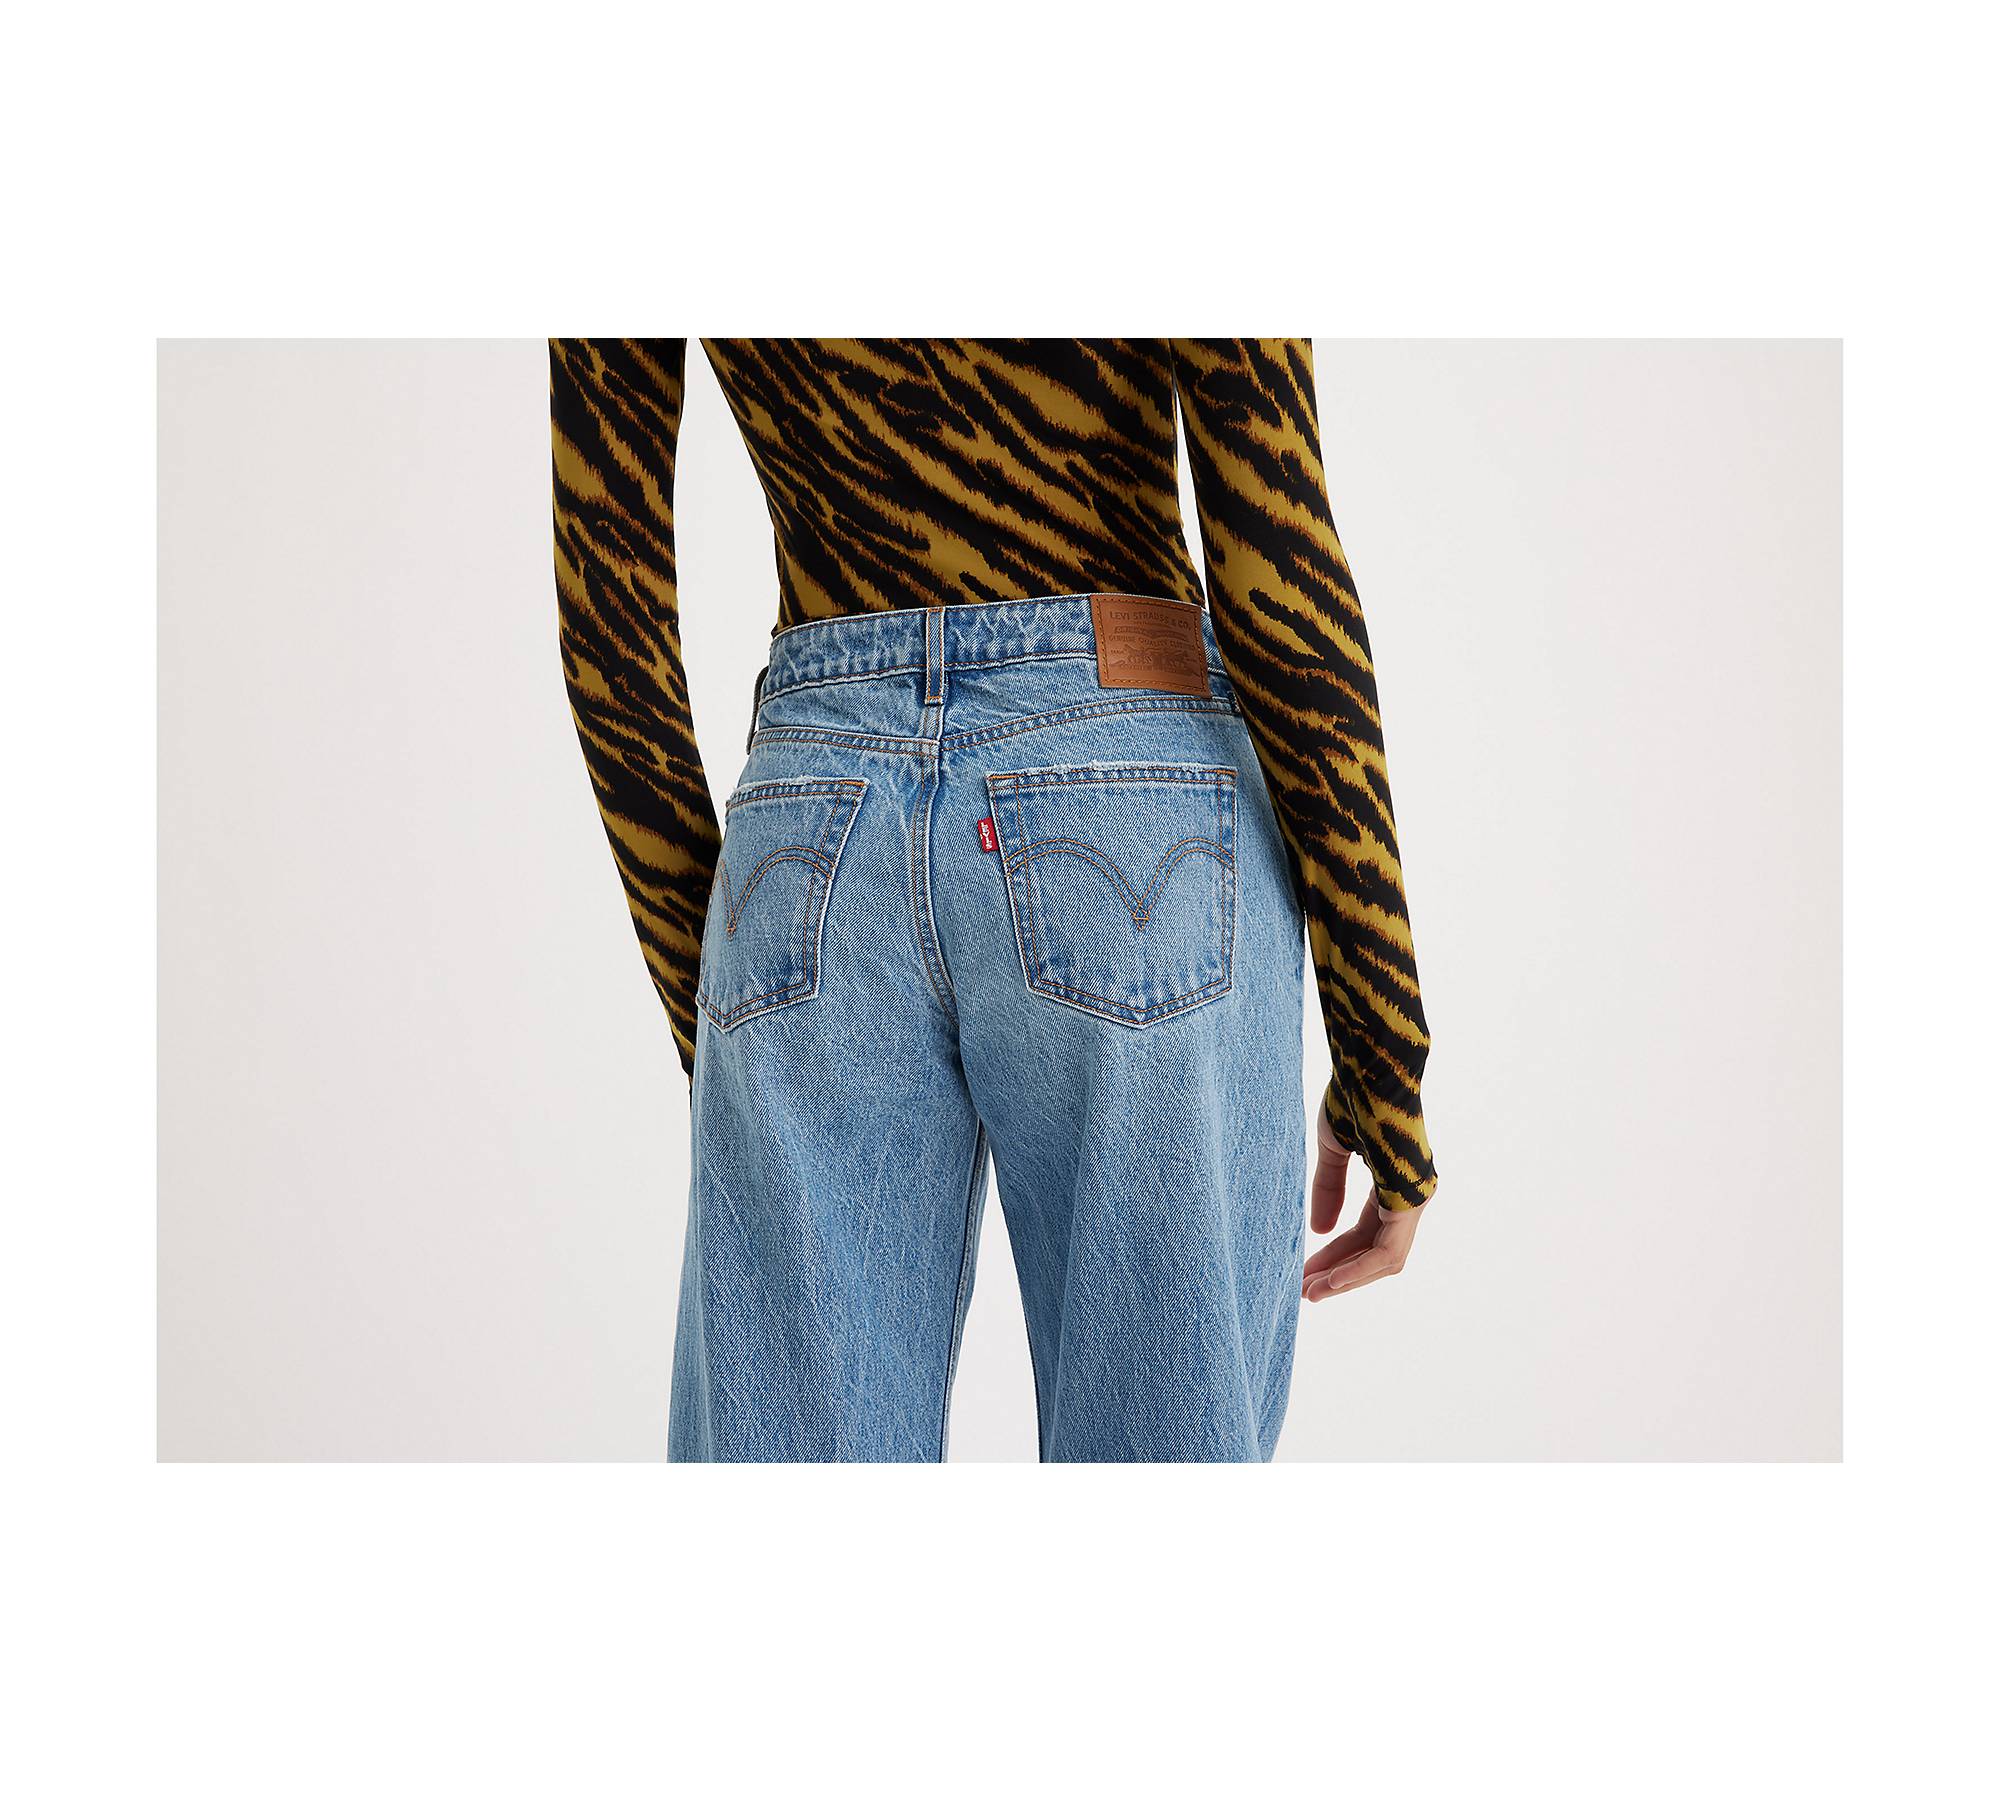 Levis Big Baggy Jeans - Real World